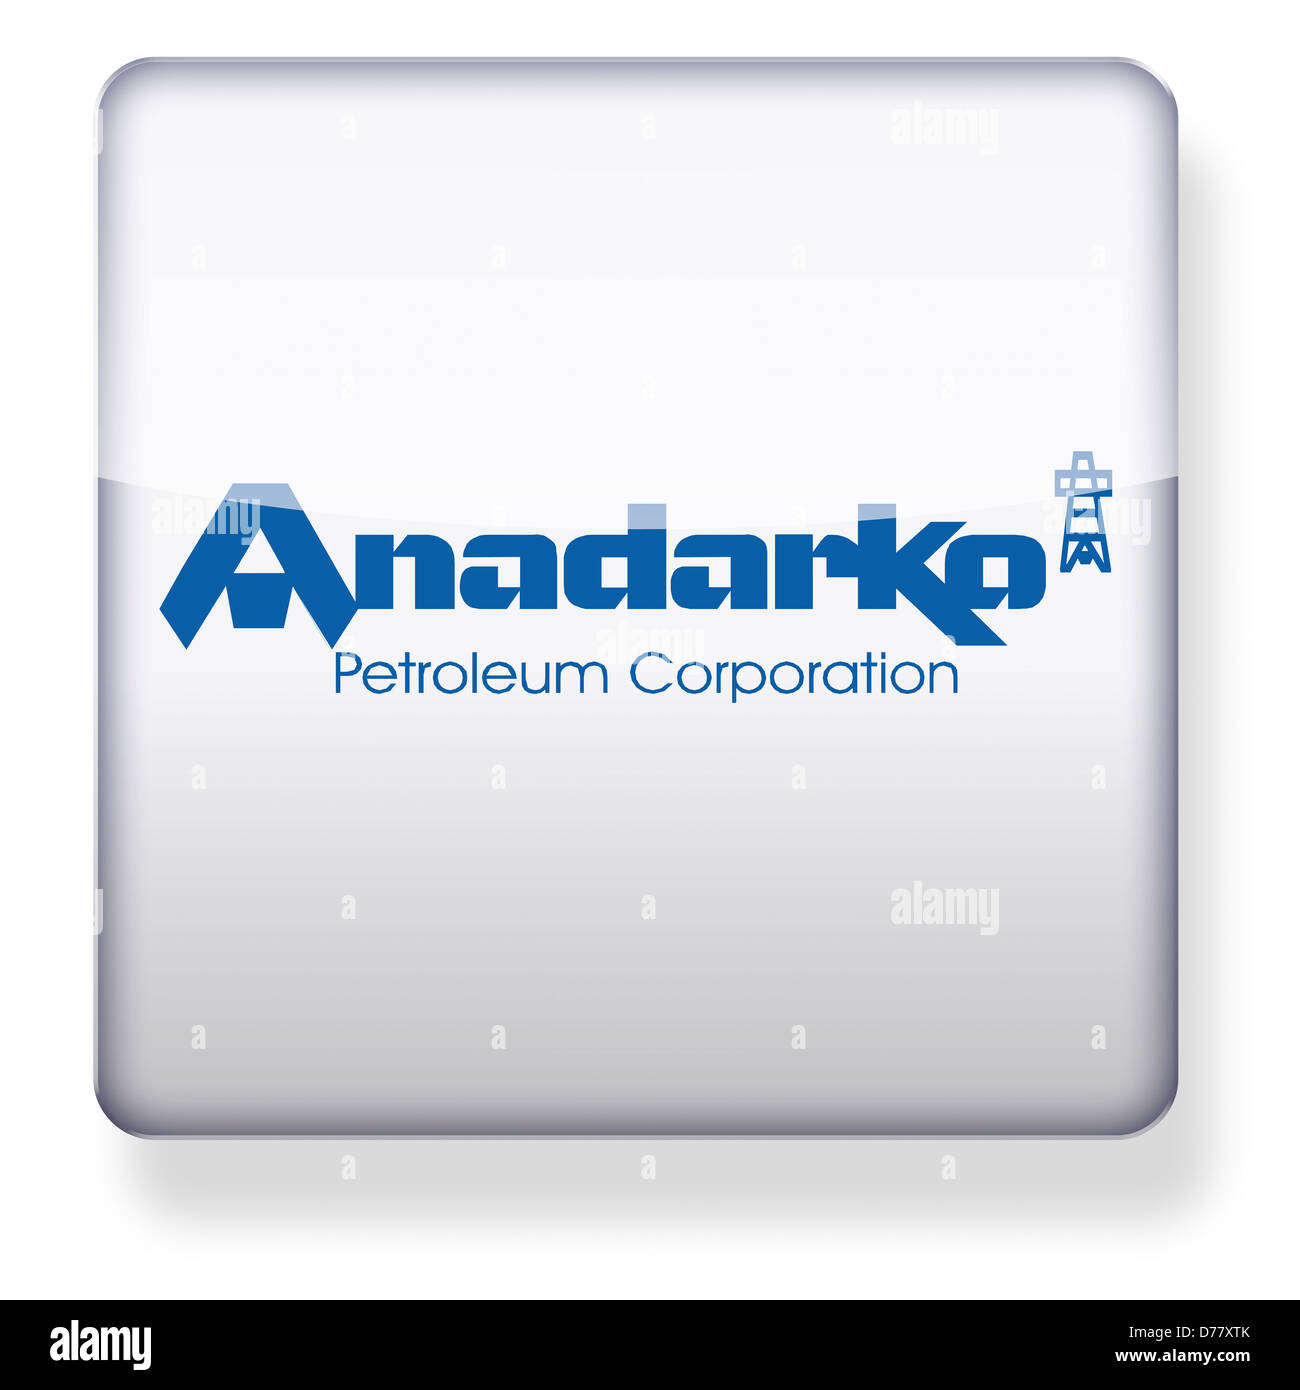 Anadarko Petroleum Corporation logo as an app icon. Clipping path included. Stock Photo